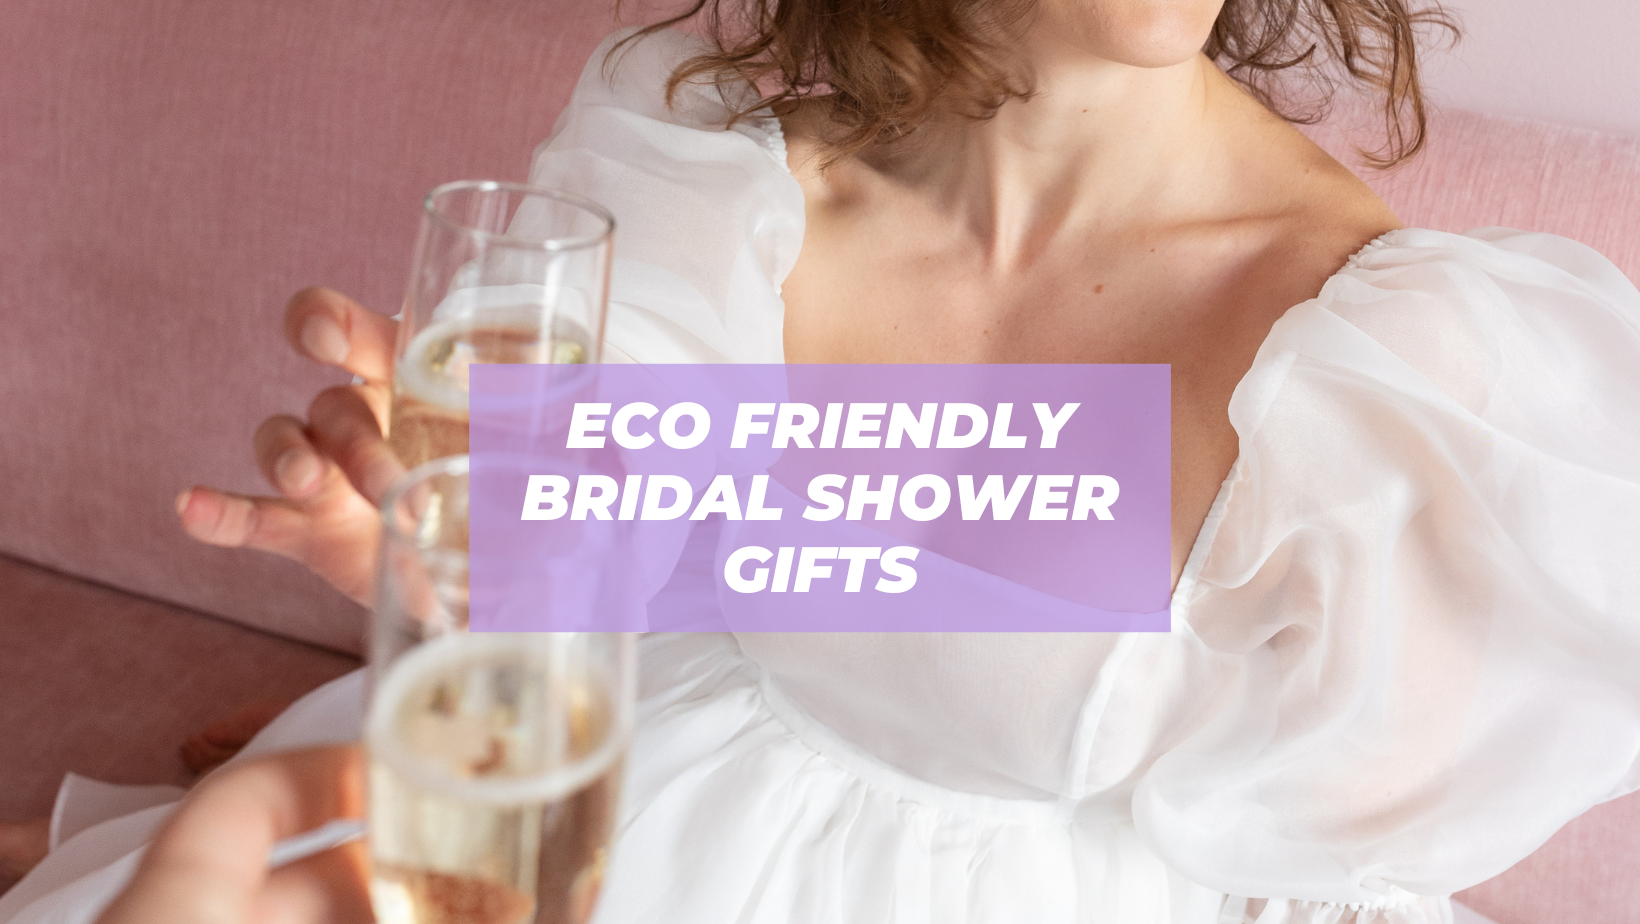 15 Bridal Shower Gift Basket Ideas for the Perfect Present